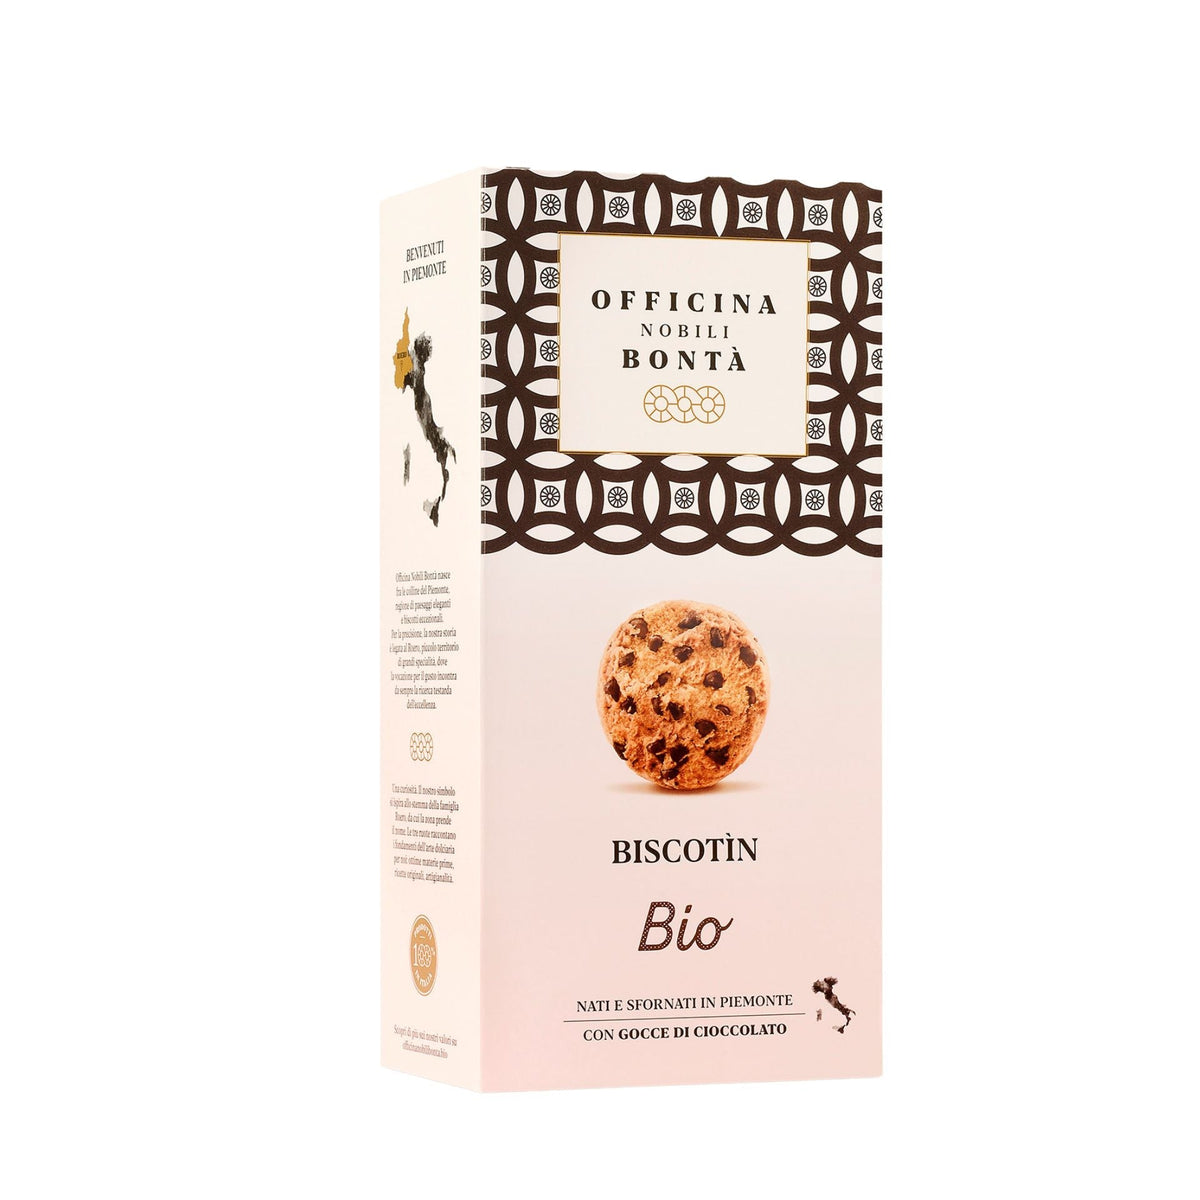 Officina Nobili Bonta Organic Cookie Biscotin Biscuits 180g (Box)  | Imported and distributed in the UK by Just Gourmet Foods